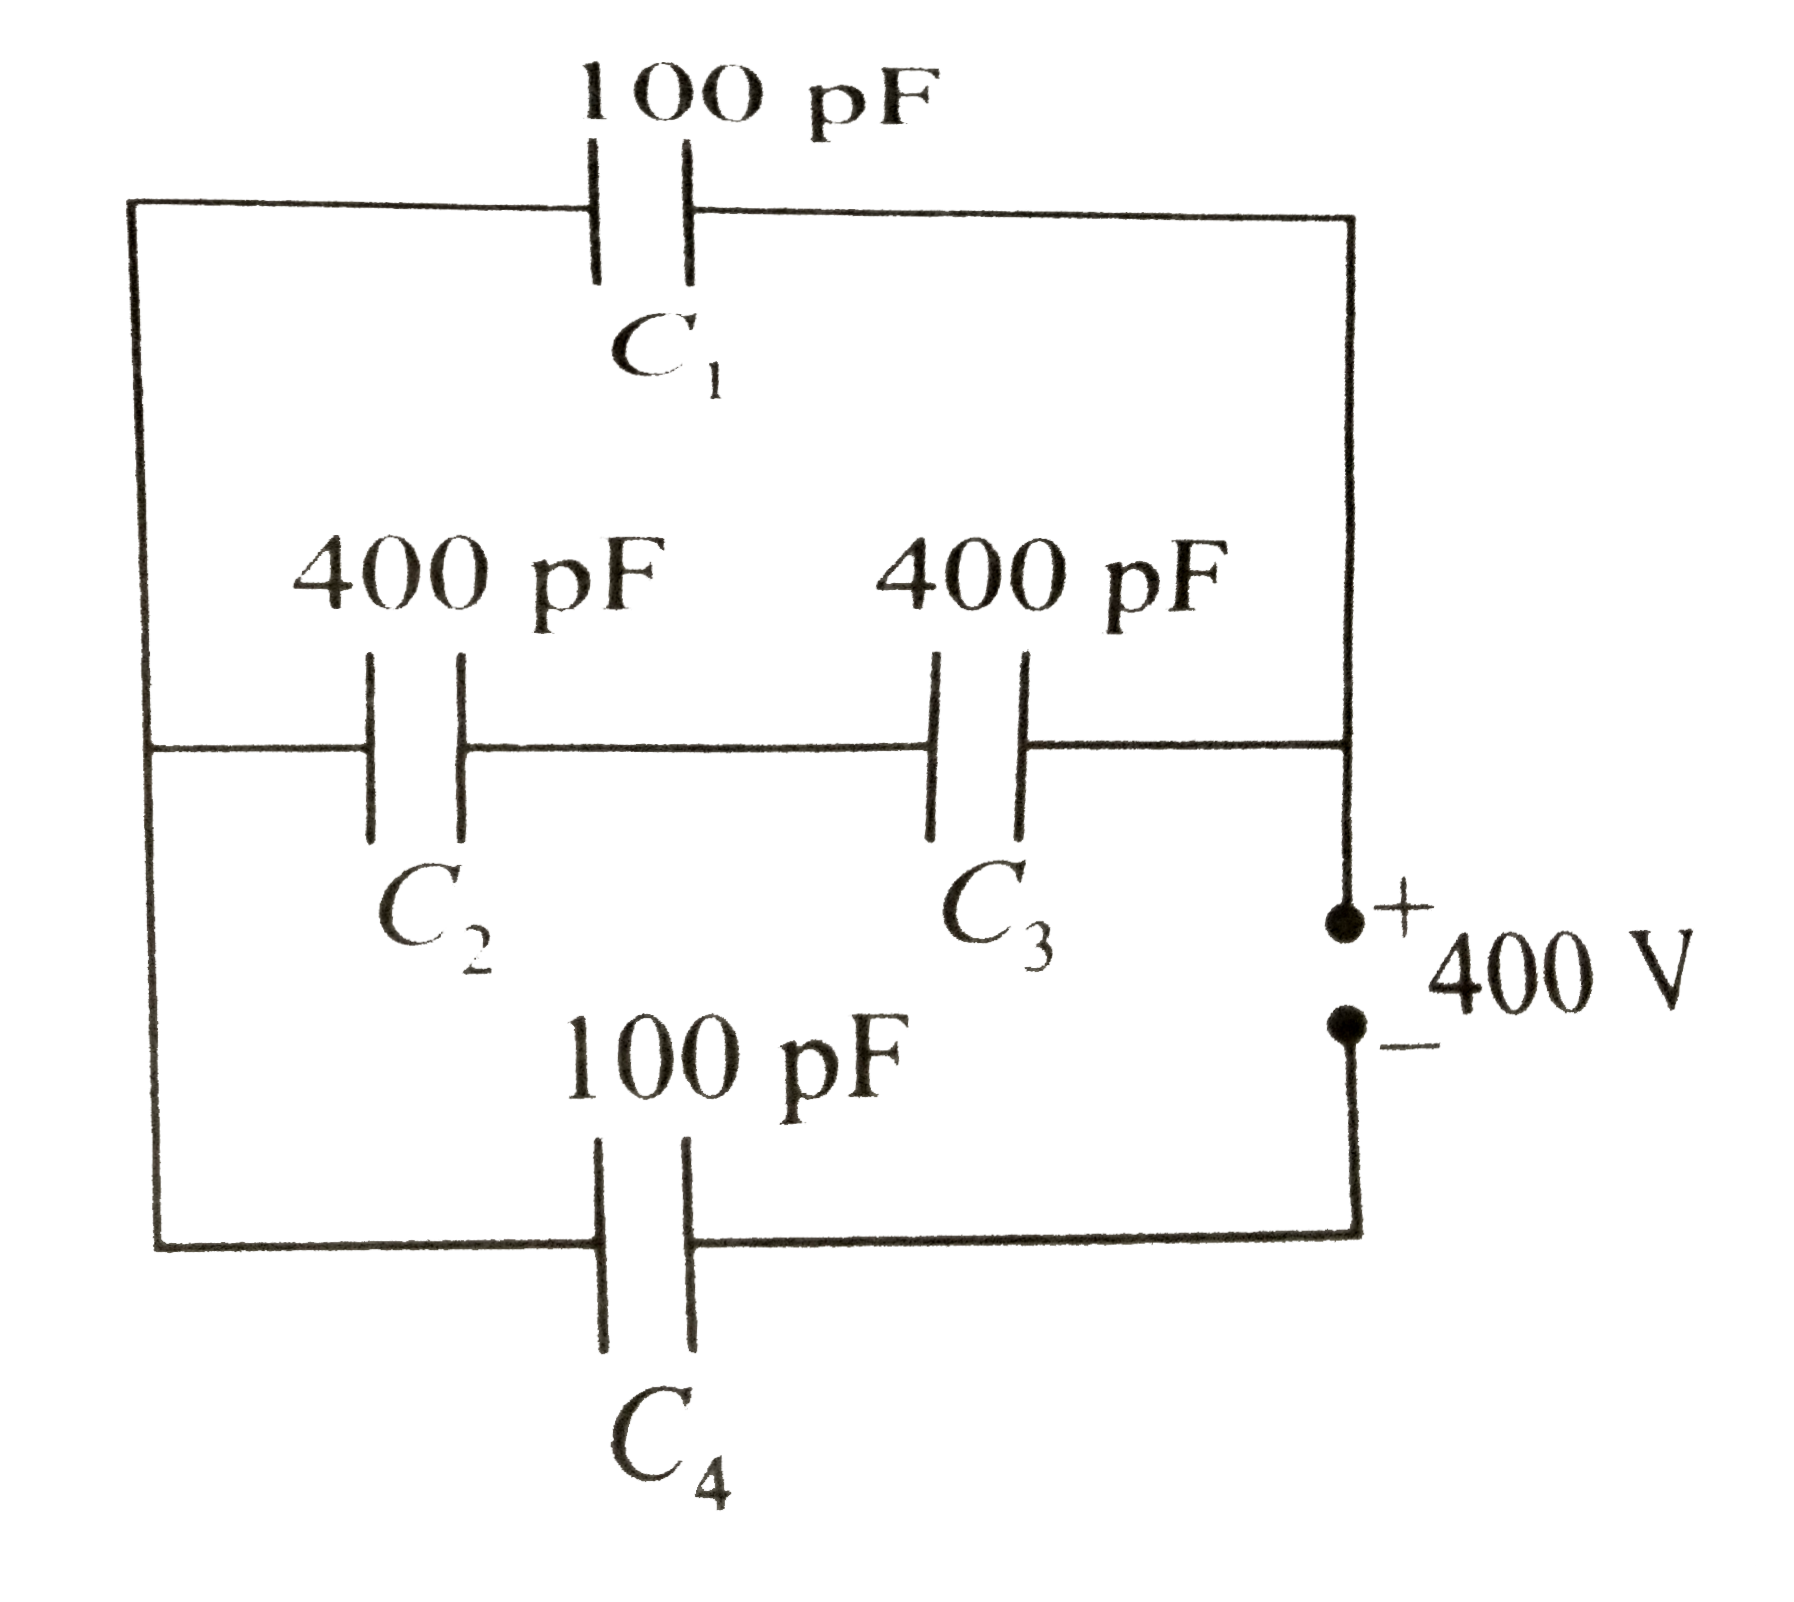 The equivalent capacitance for the network shown in the figure is